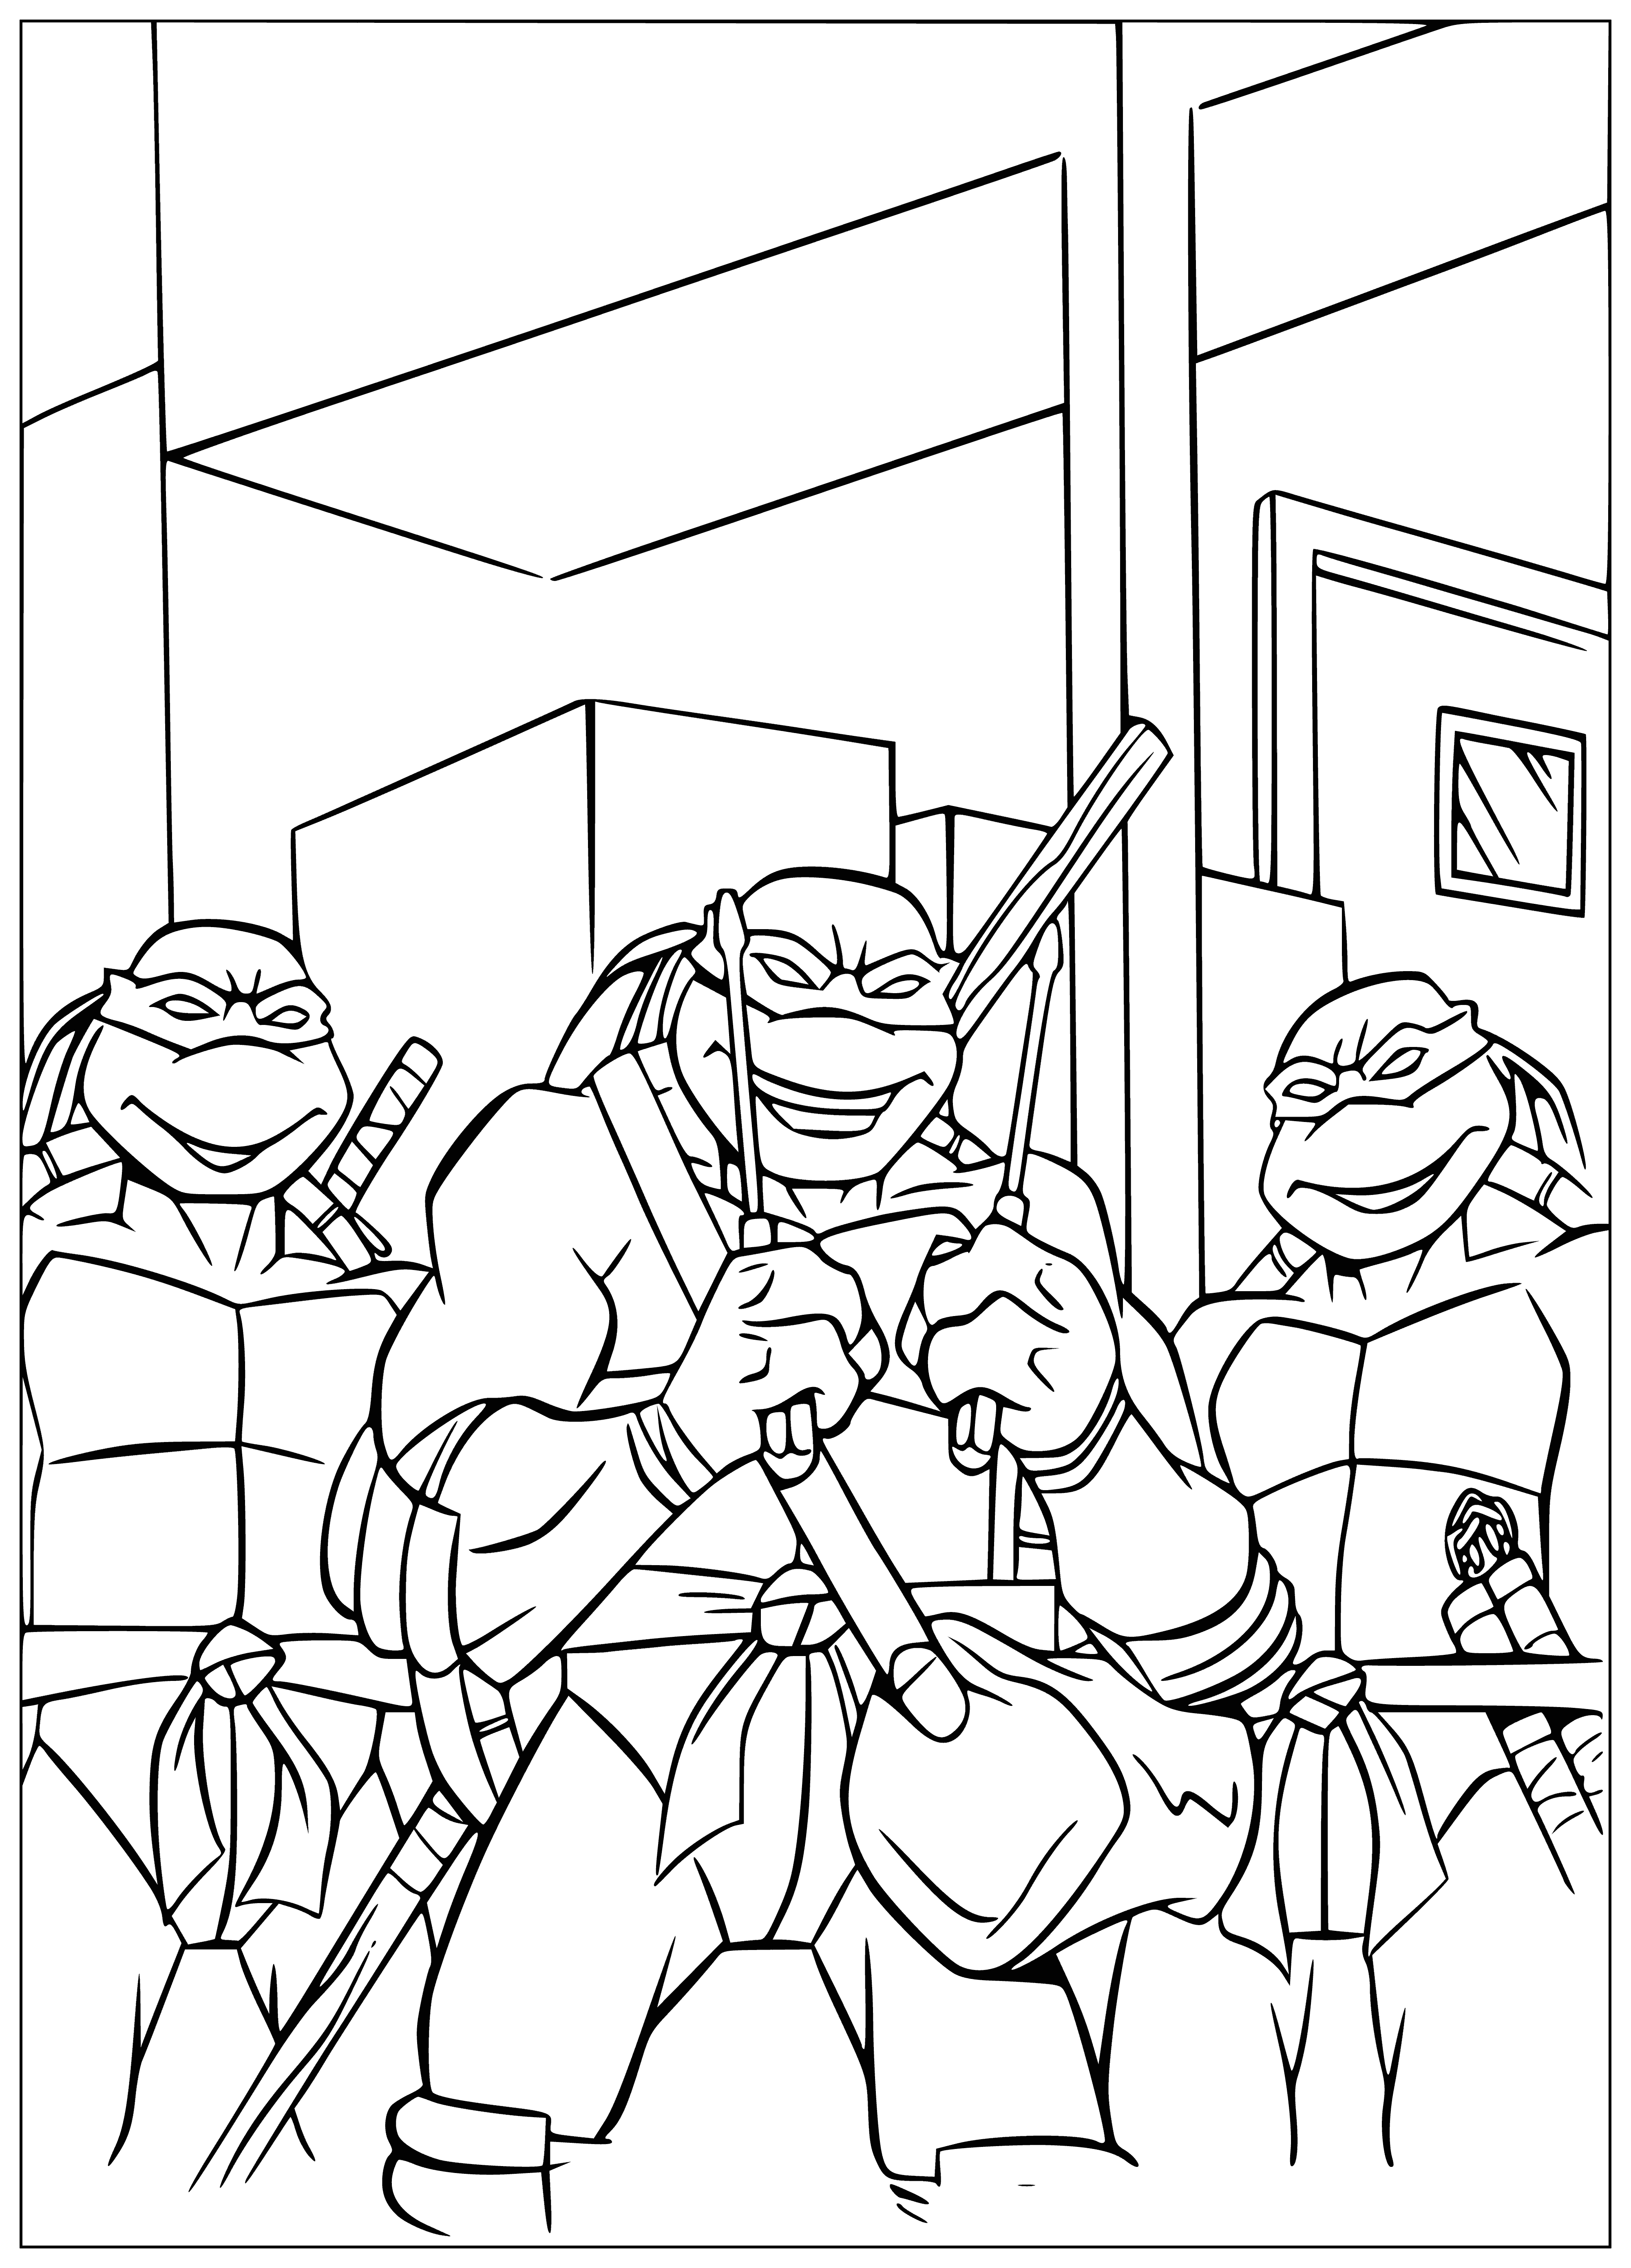 coloring page: 4 turtles with colorful masks & weapons, 2 with arms crossed- a fun coloring page! #turtles #coloring #fun